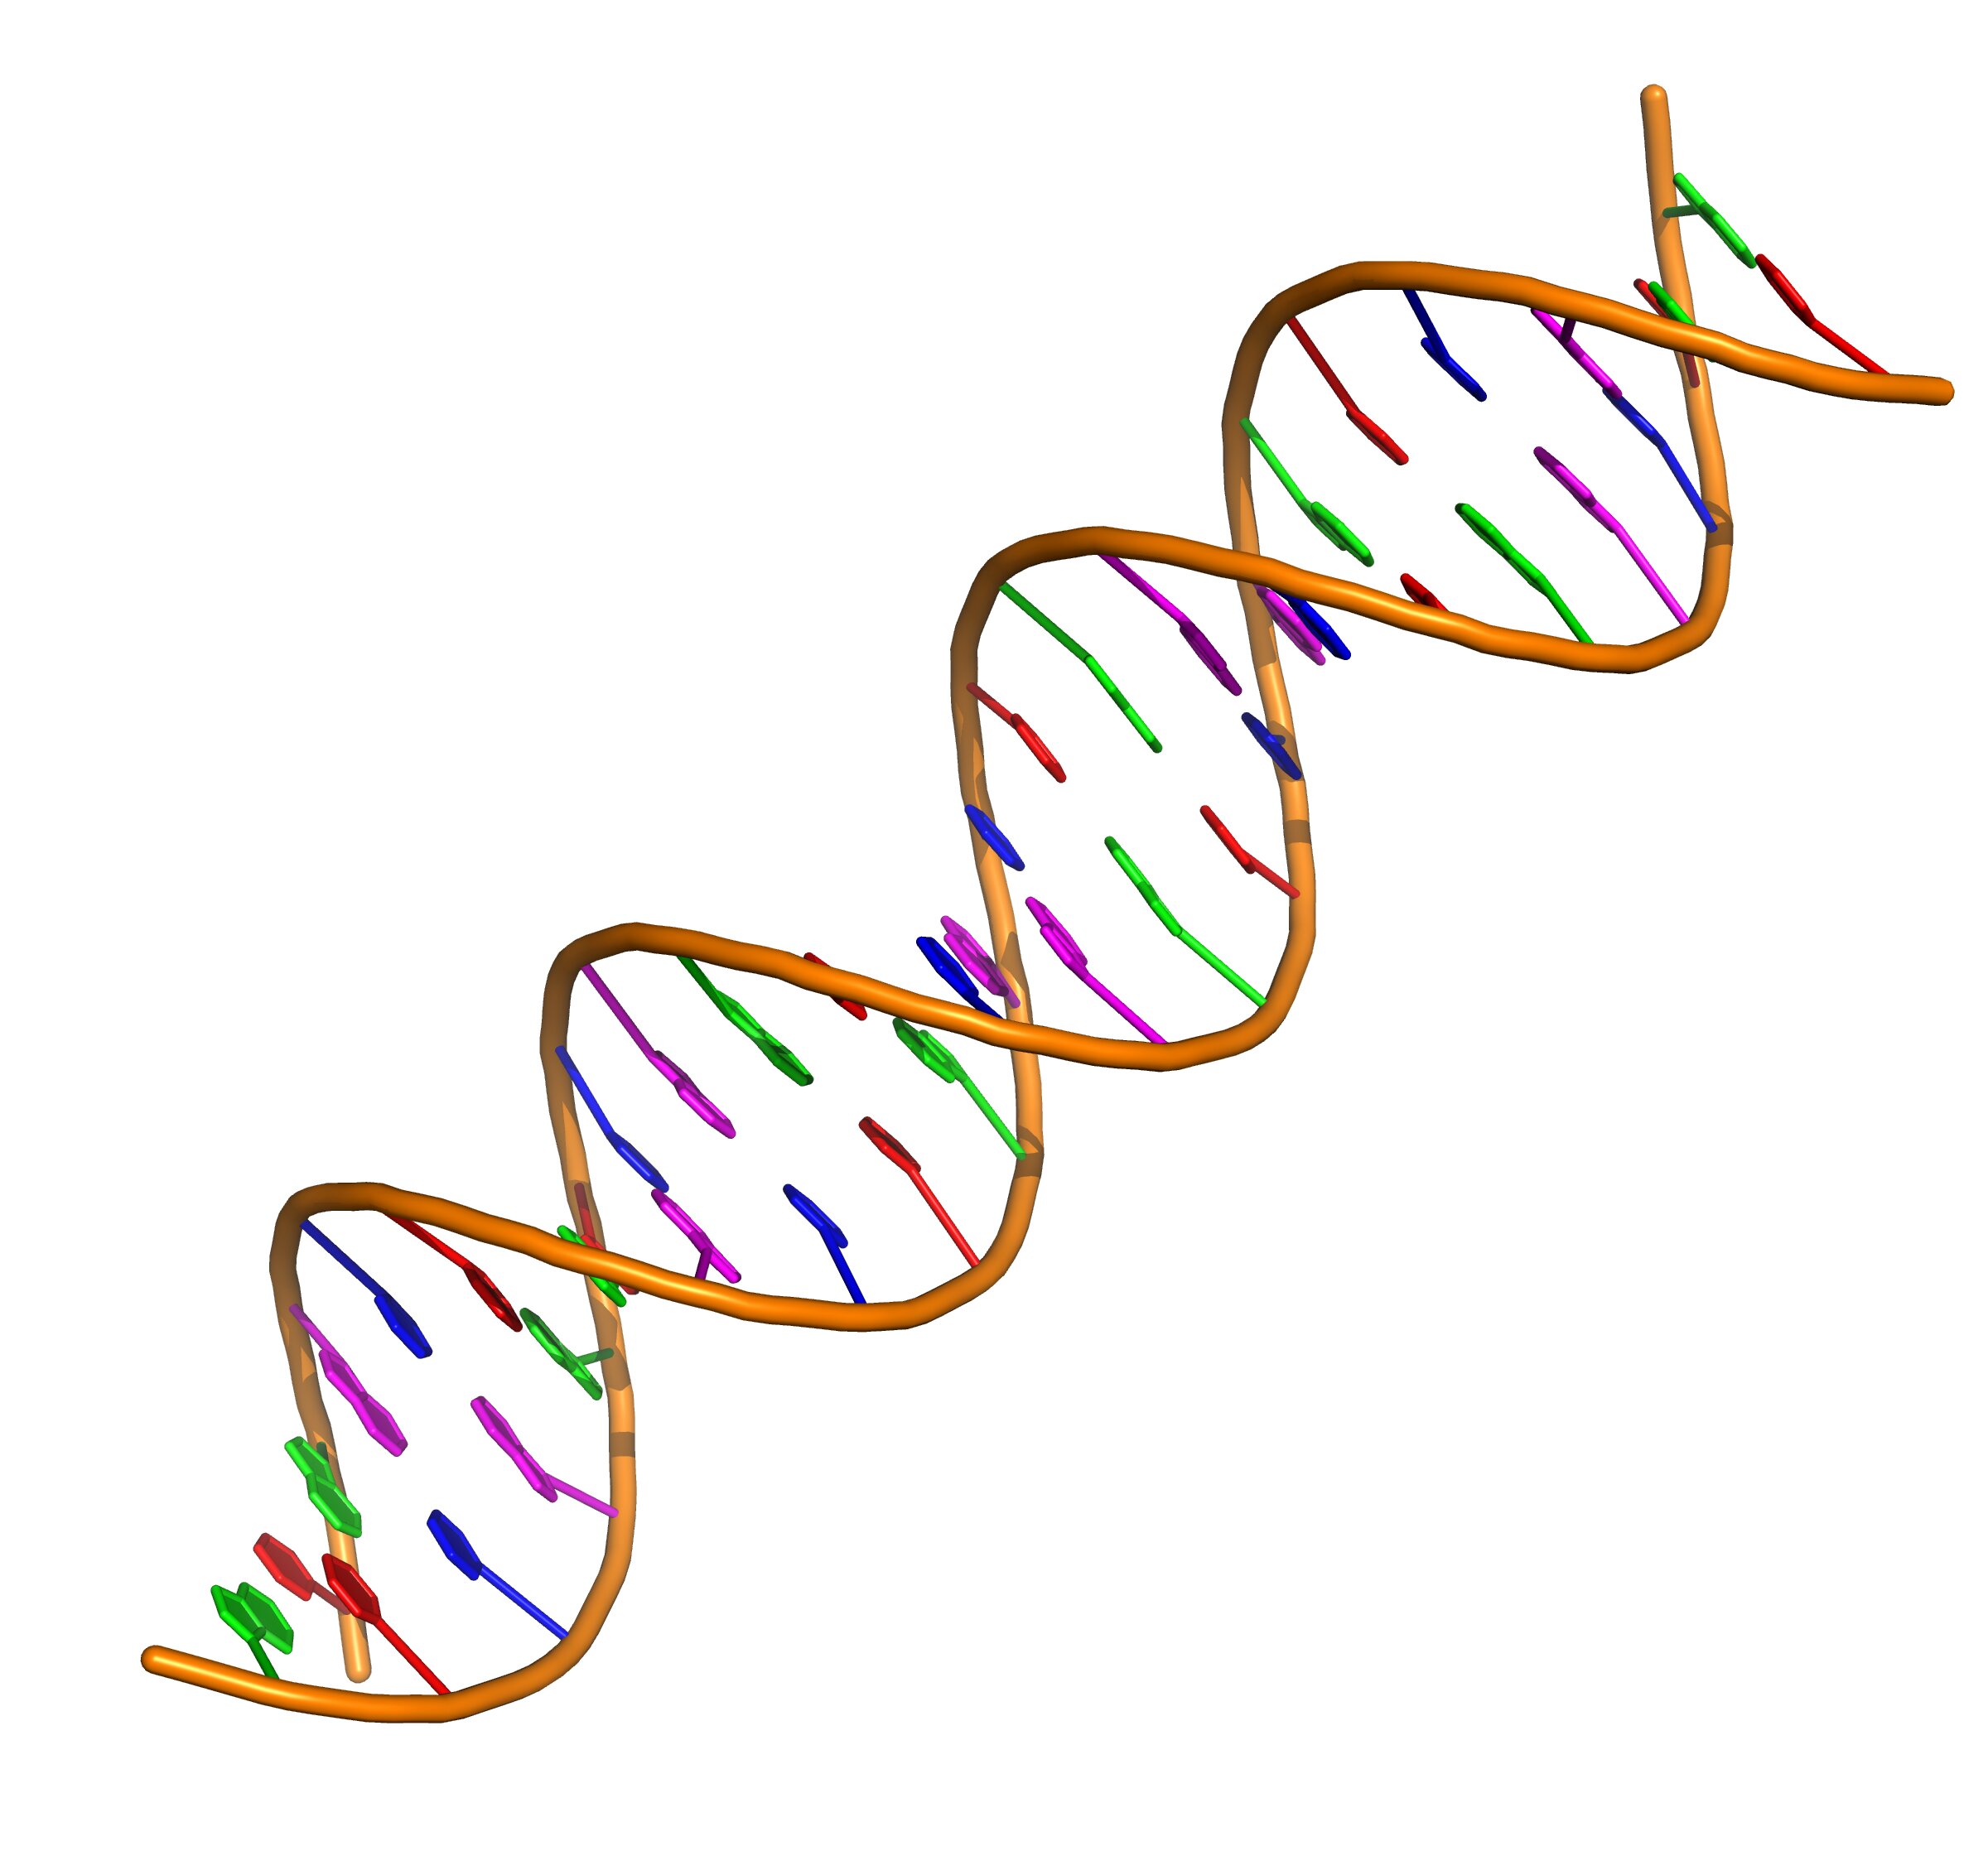 Dynamic twists and loops can enable DNA to modulate its function